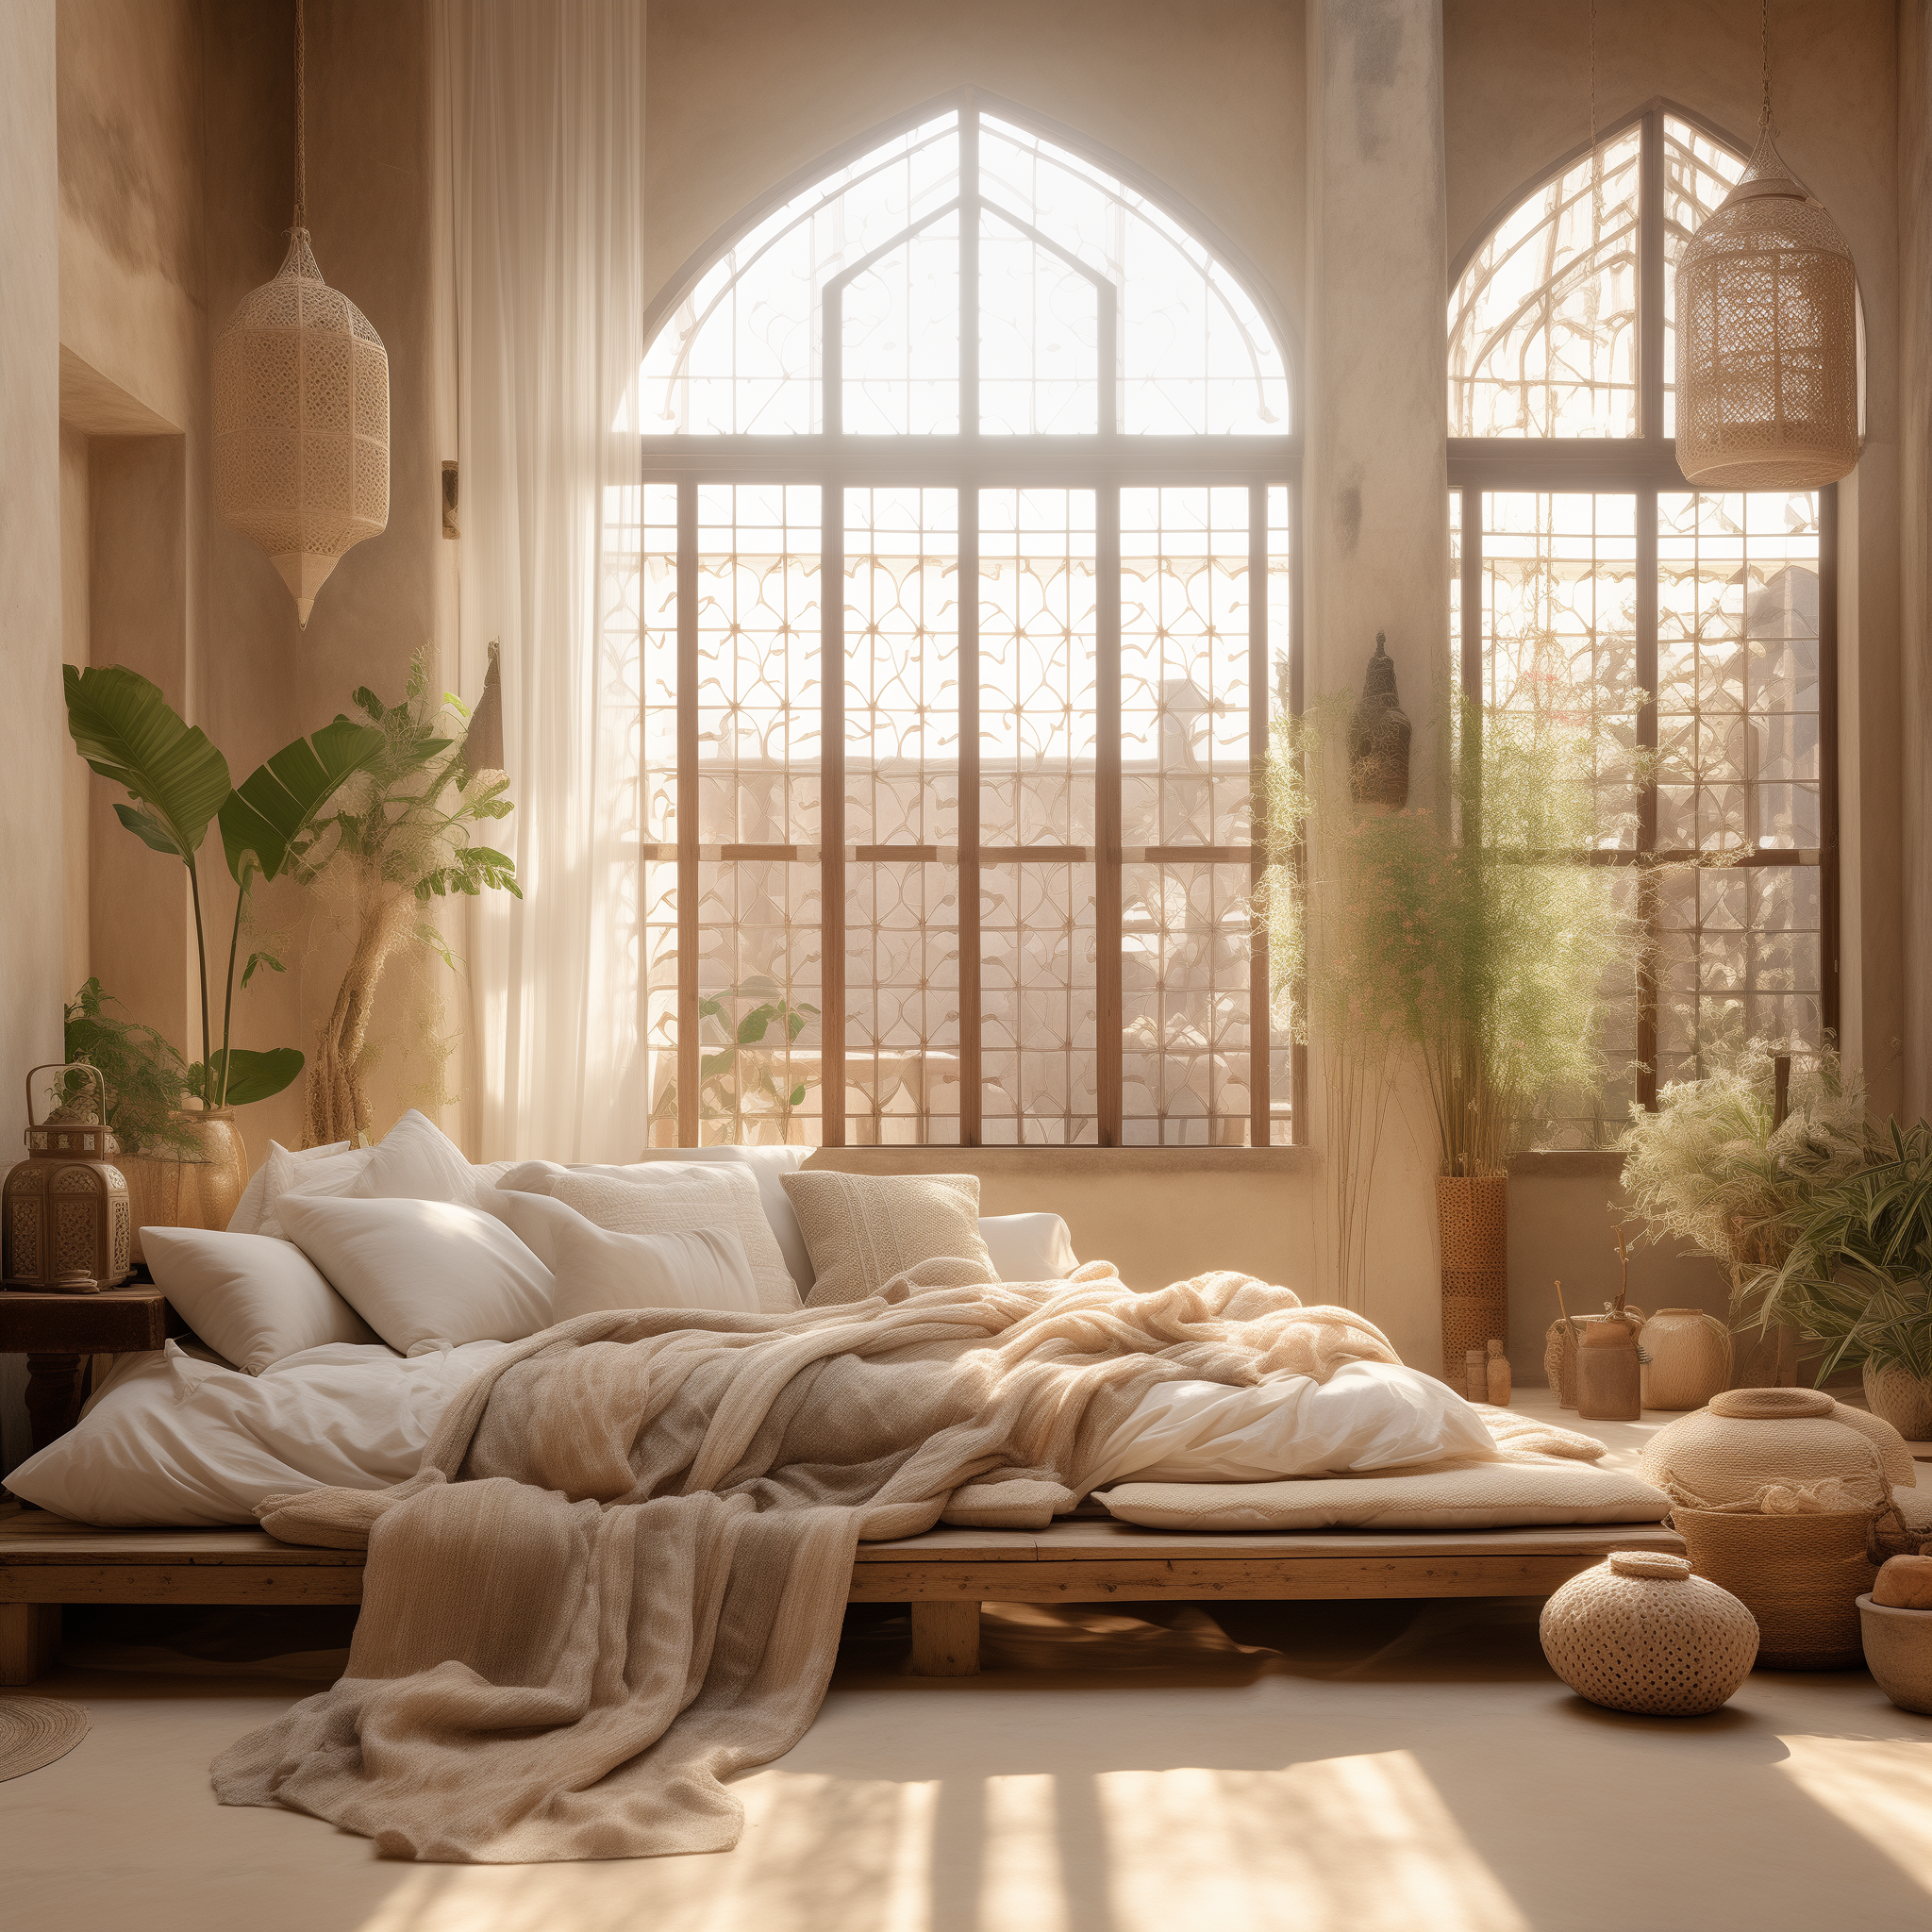 moroccan bedroom interior design inspired theme style architecture modern